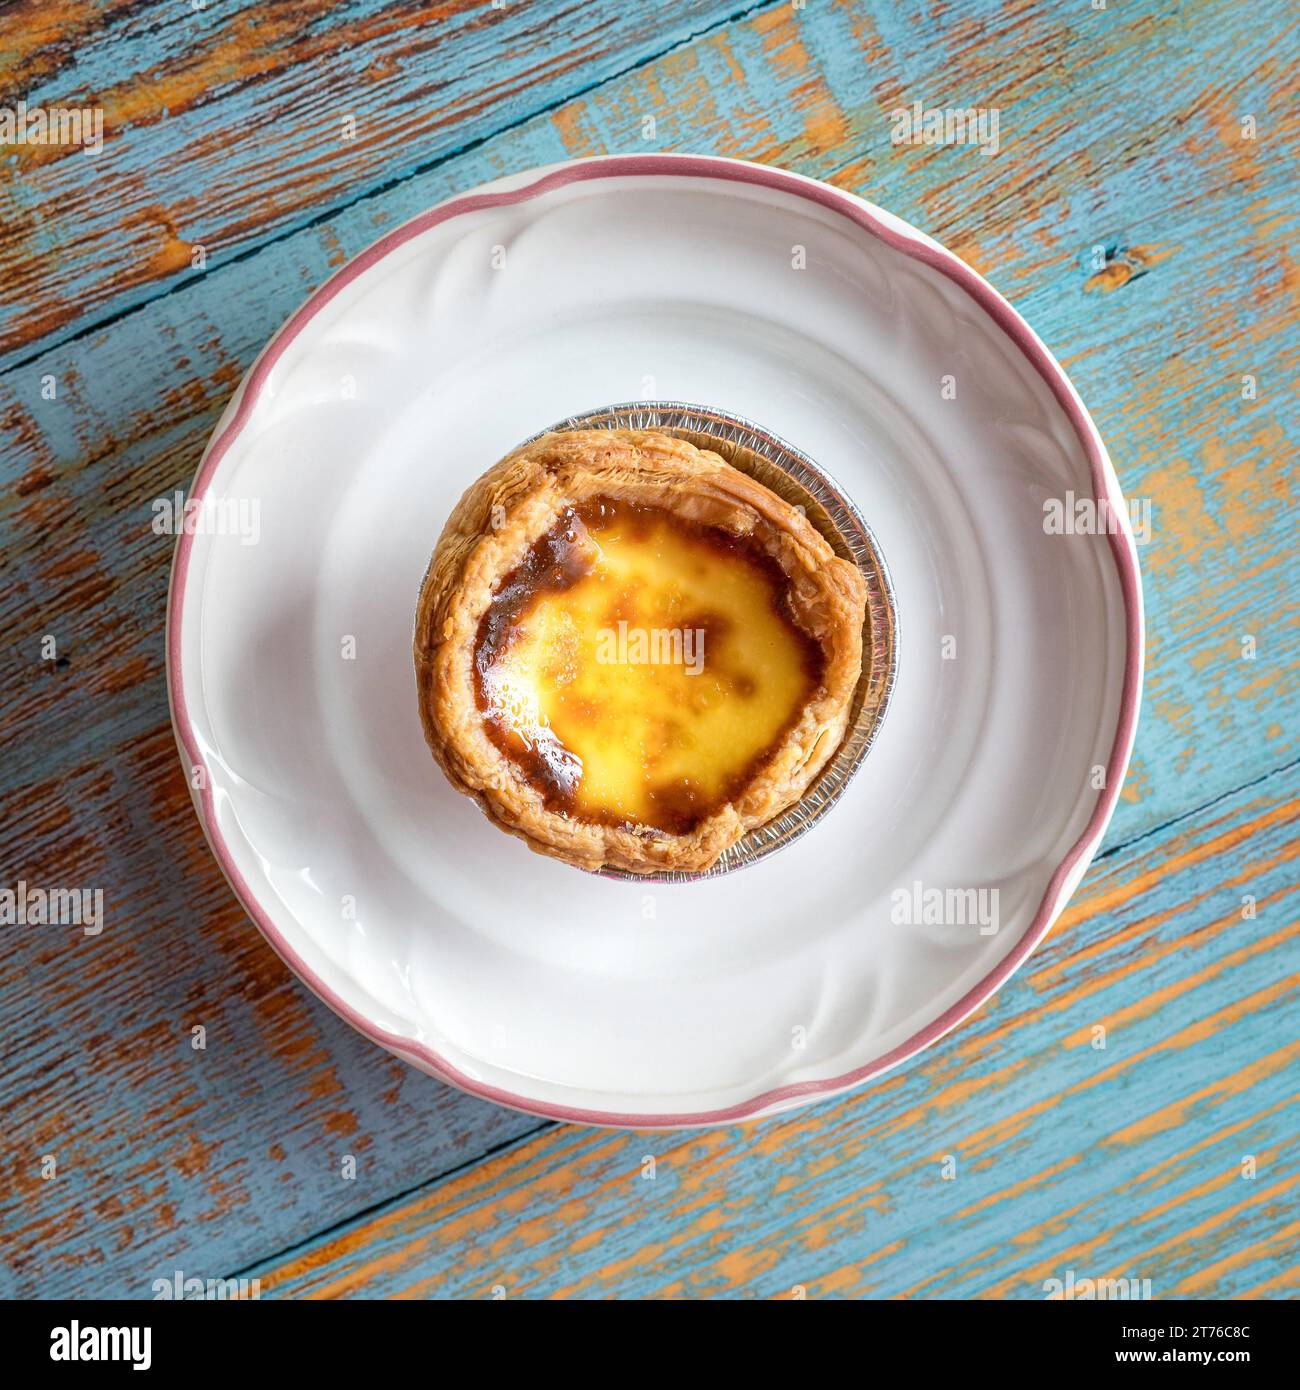 Portuguese egg tart on a white plate. Top view. Stock Photo